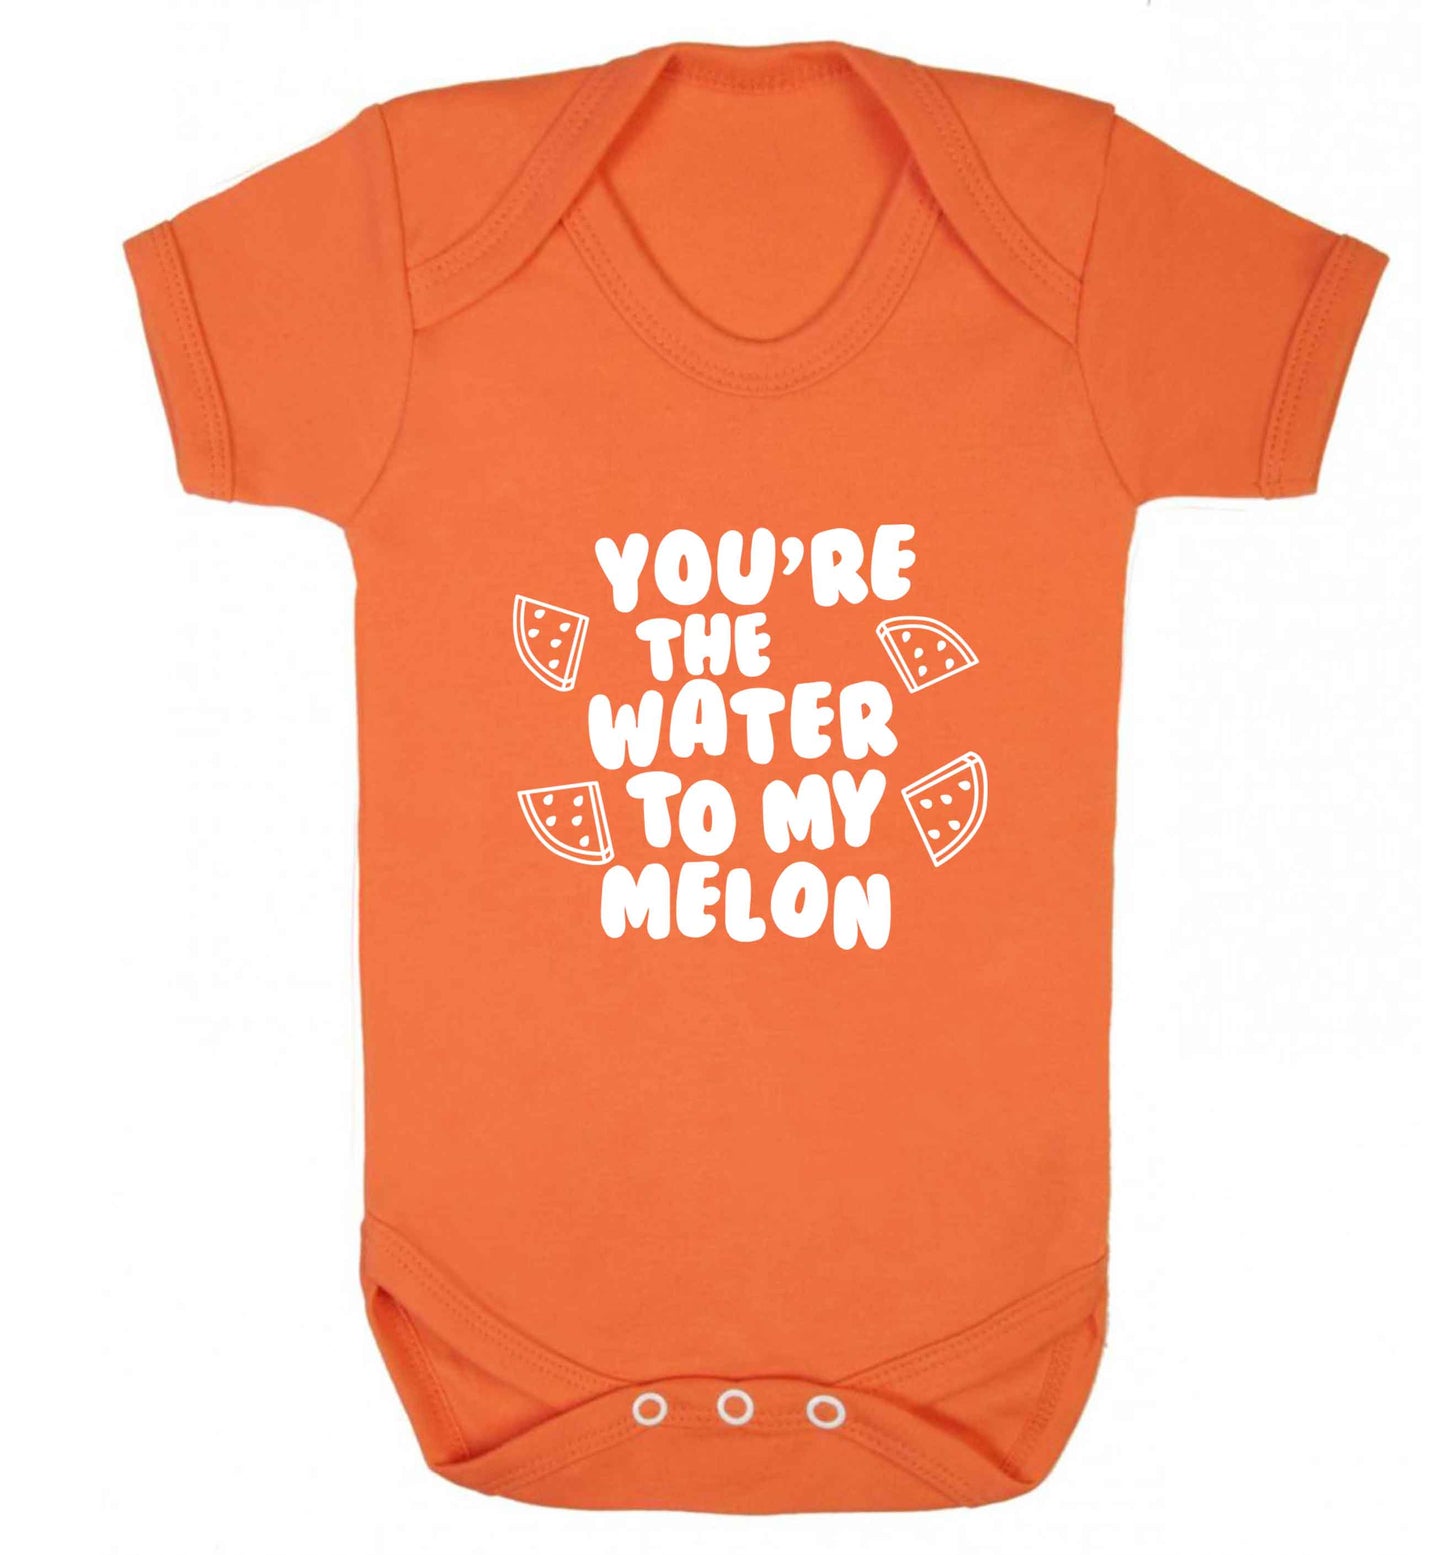 You're the water to my melon baby vest orange 18-24 months